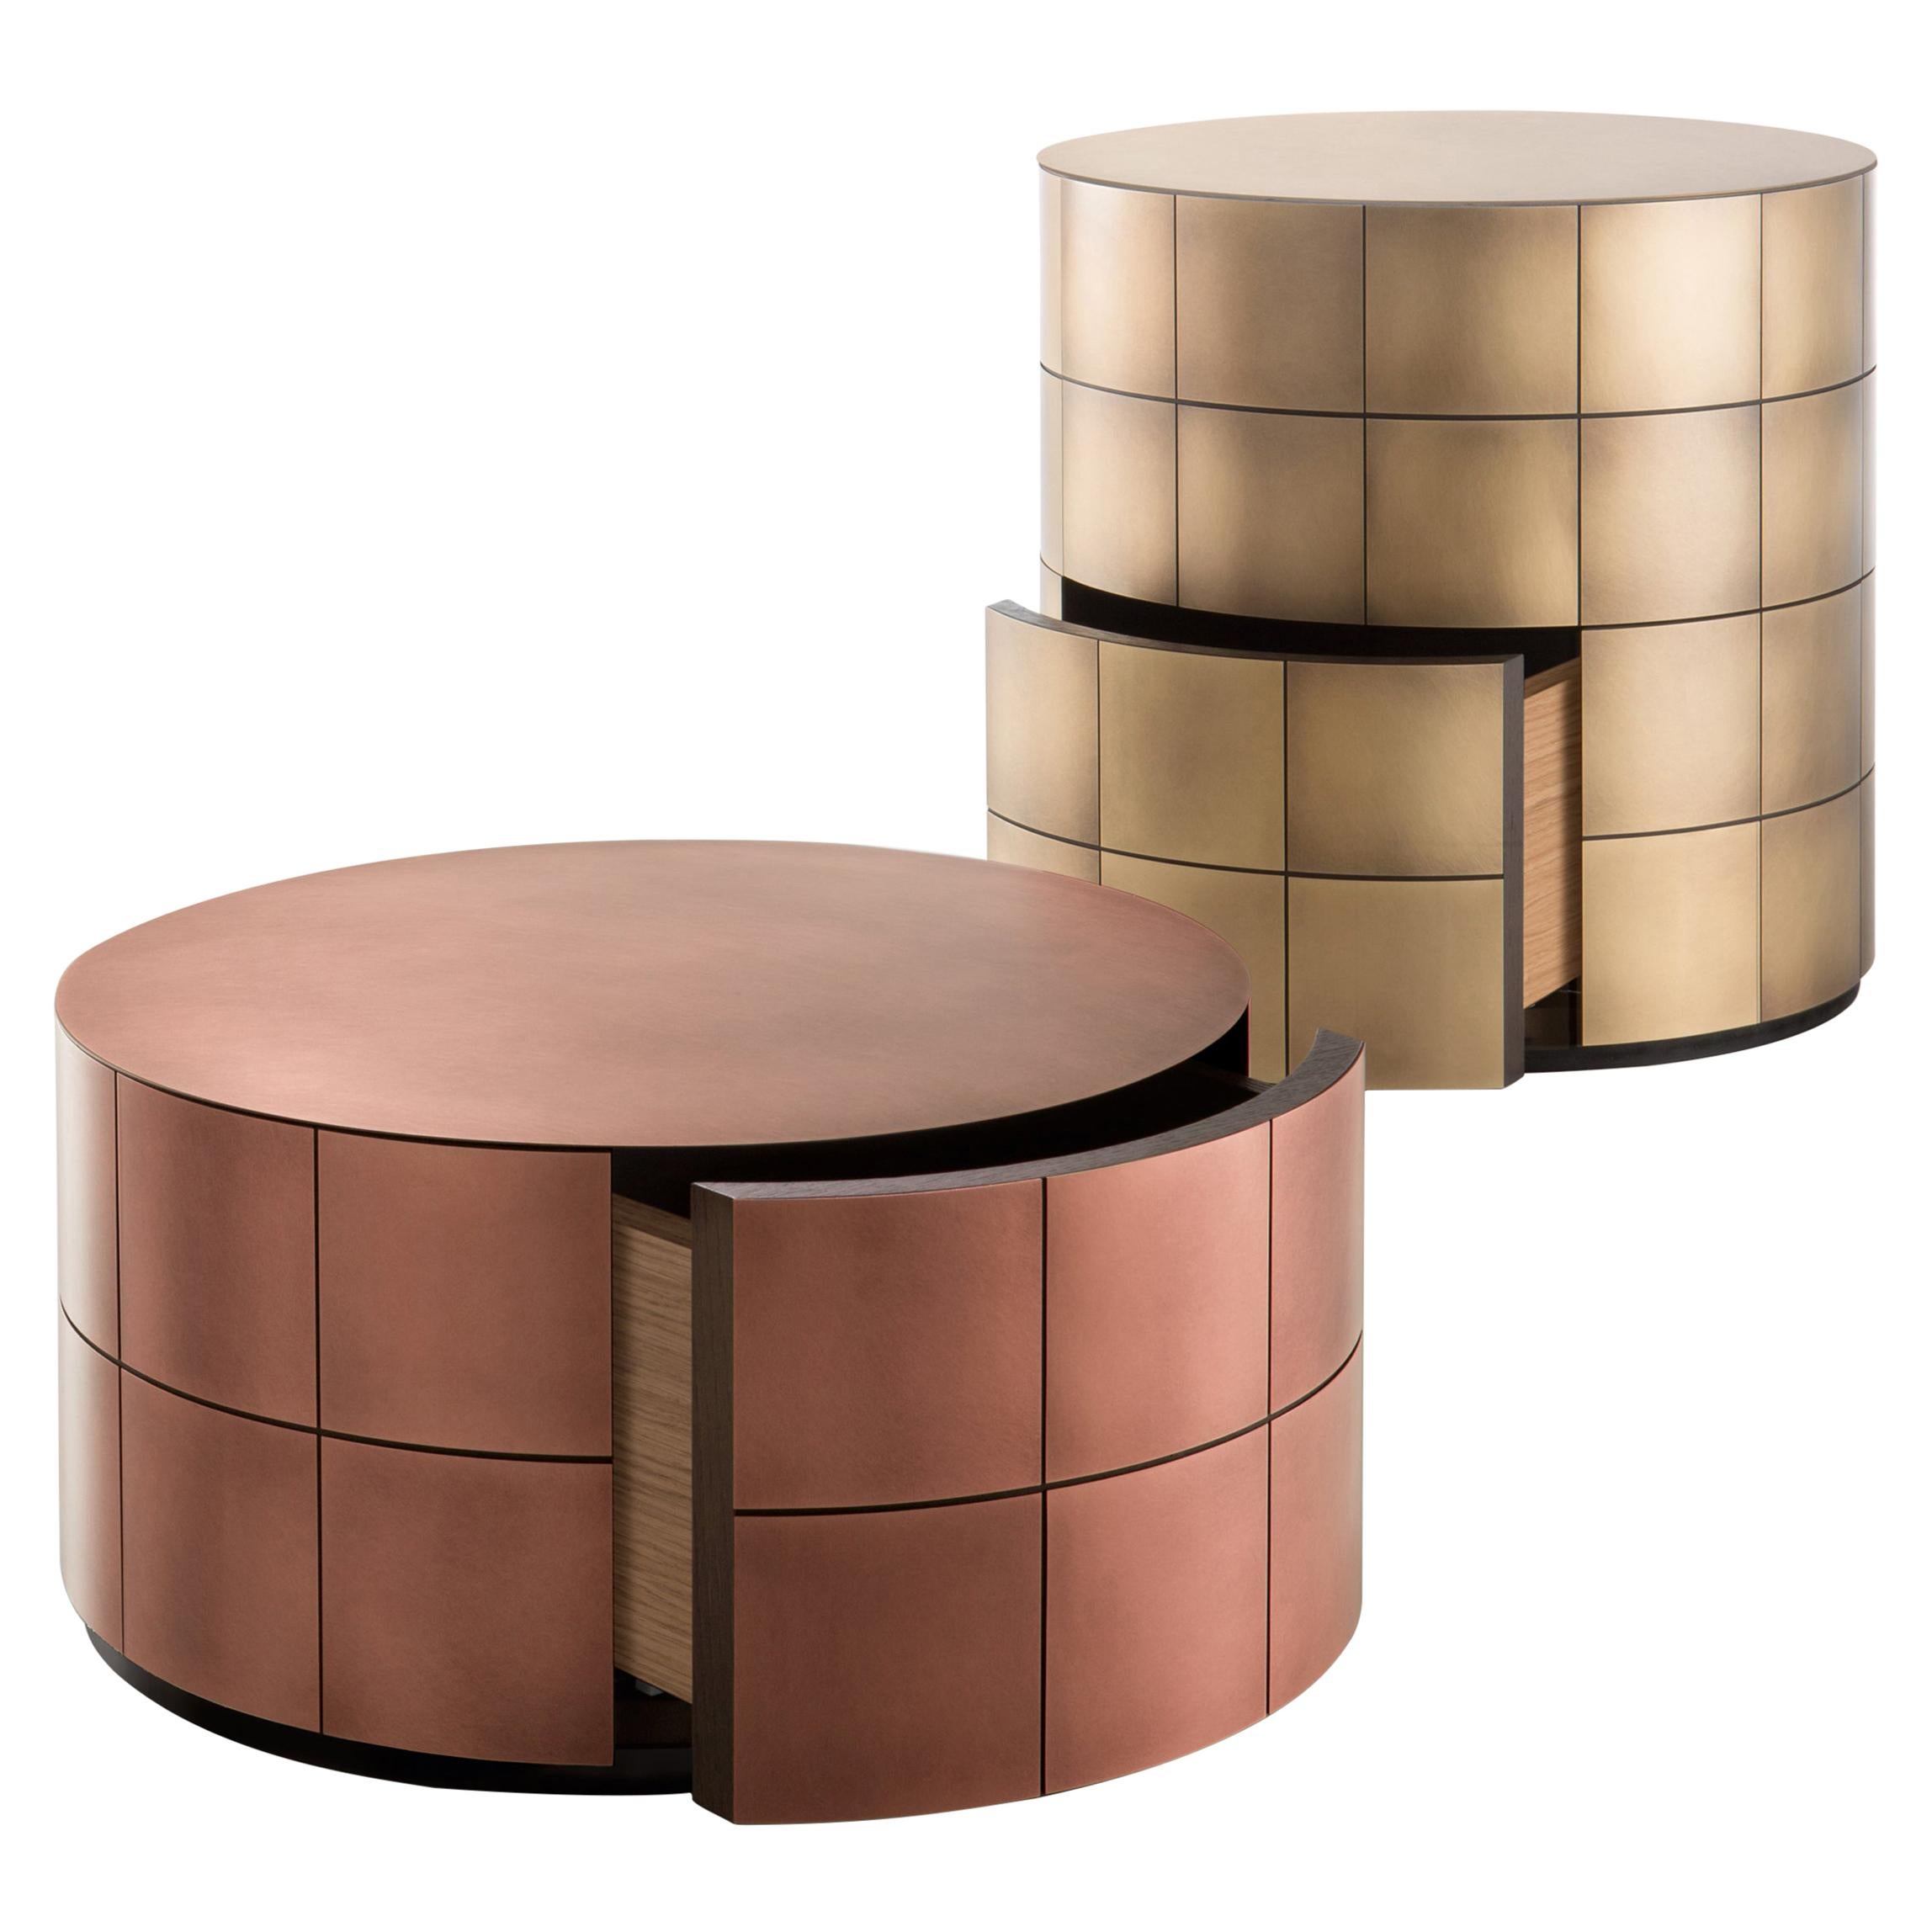 DeCastelli Pandora 27 Chest of Drawers in Brushed Copper by Martinelli Venezia For Sale